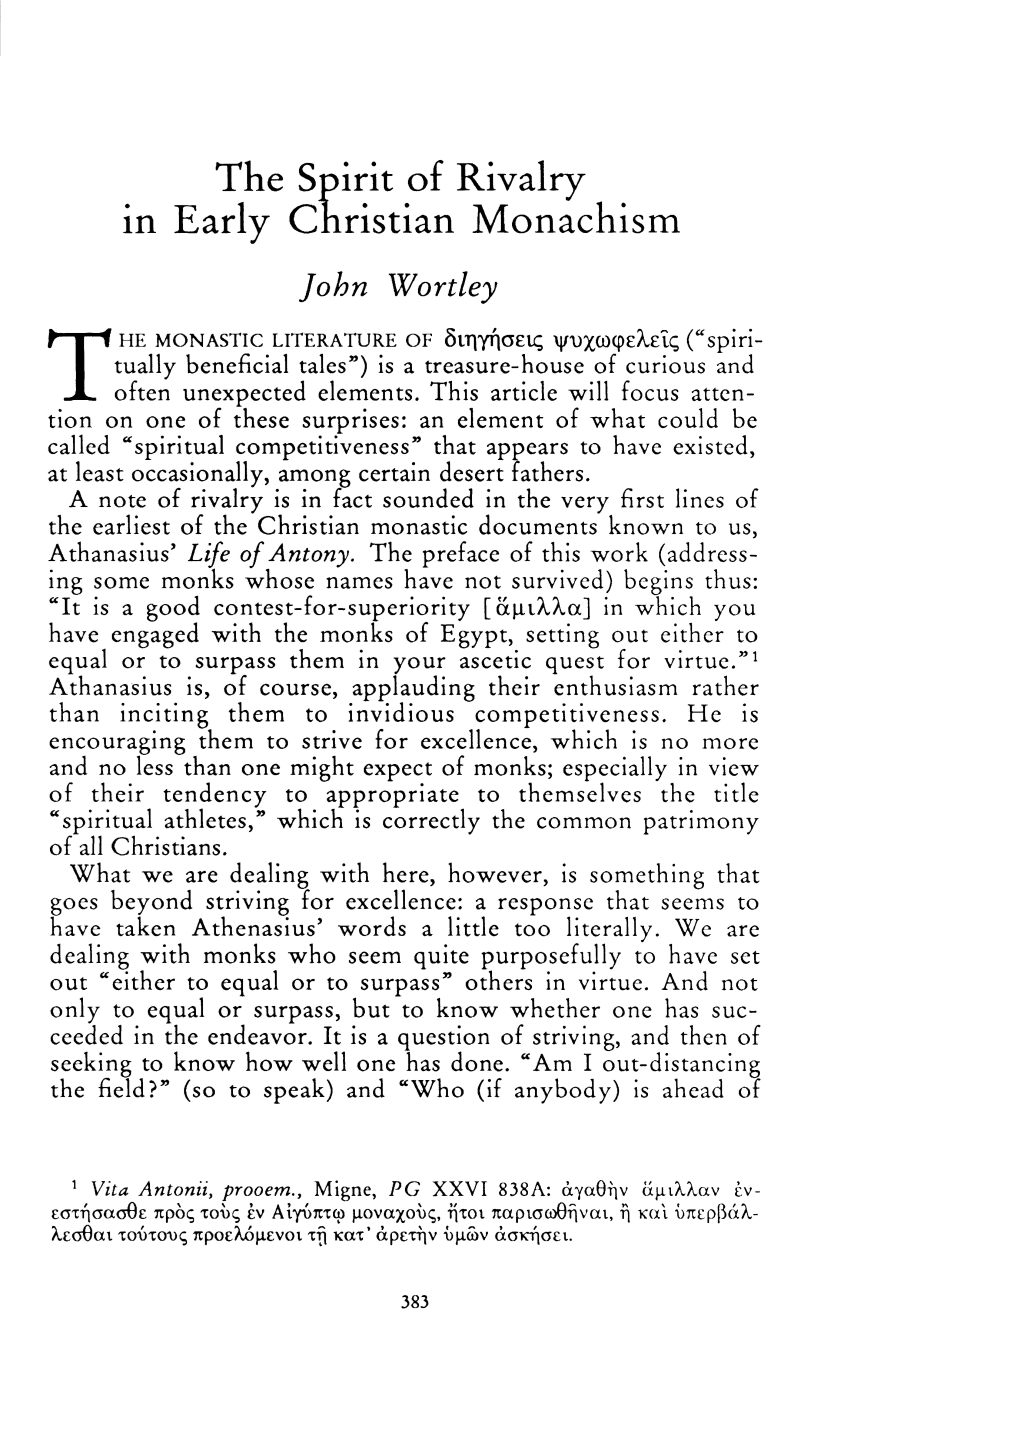 The Spirit of Rivalry Early Christian Monachism